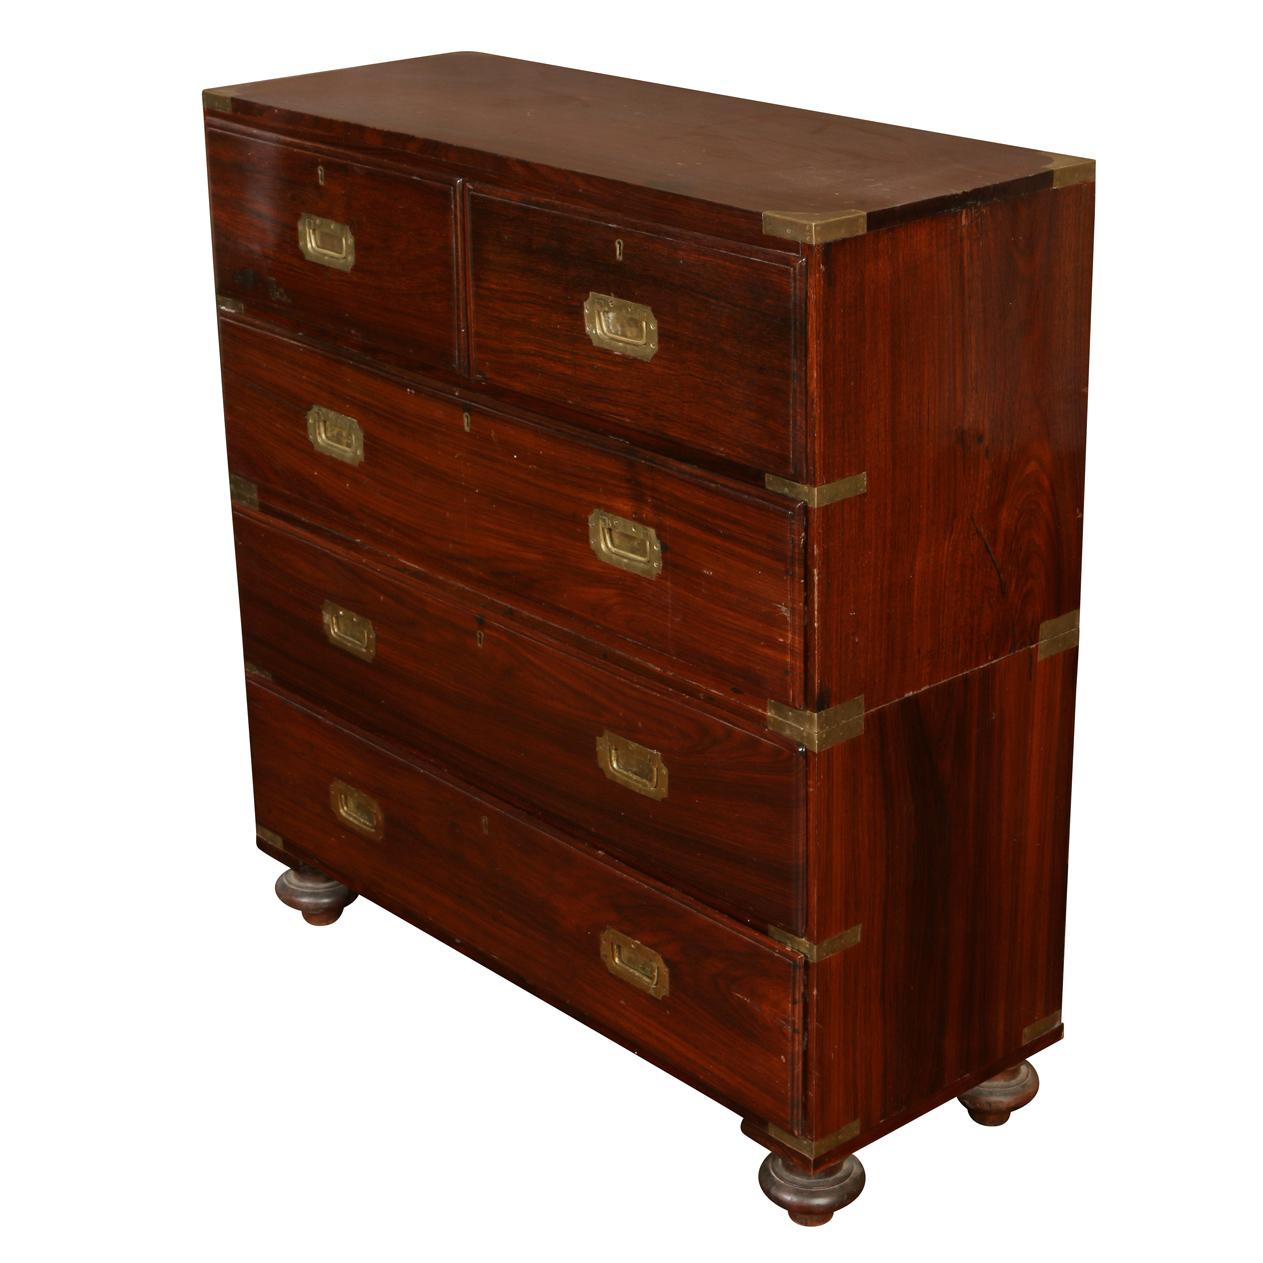 Antique English mahogany five drawer campaign chest with round feet.